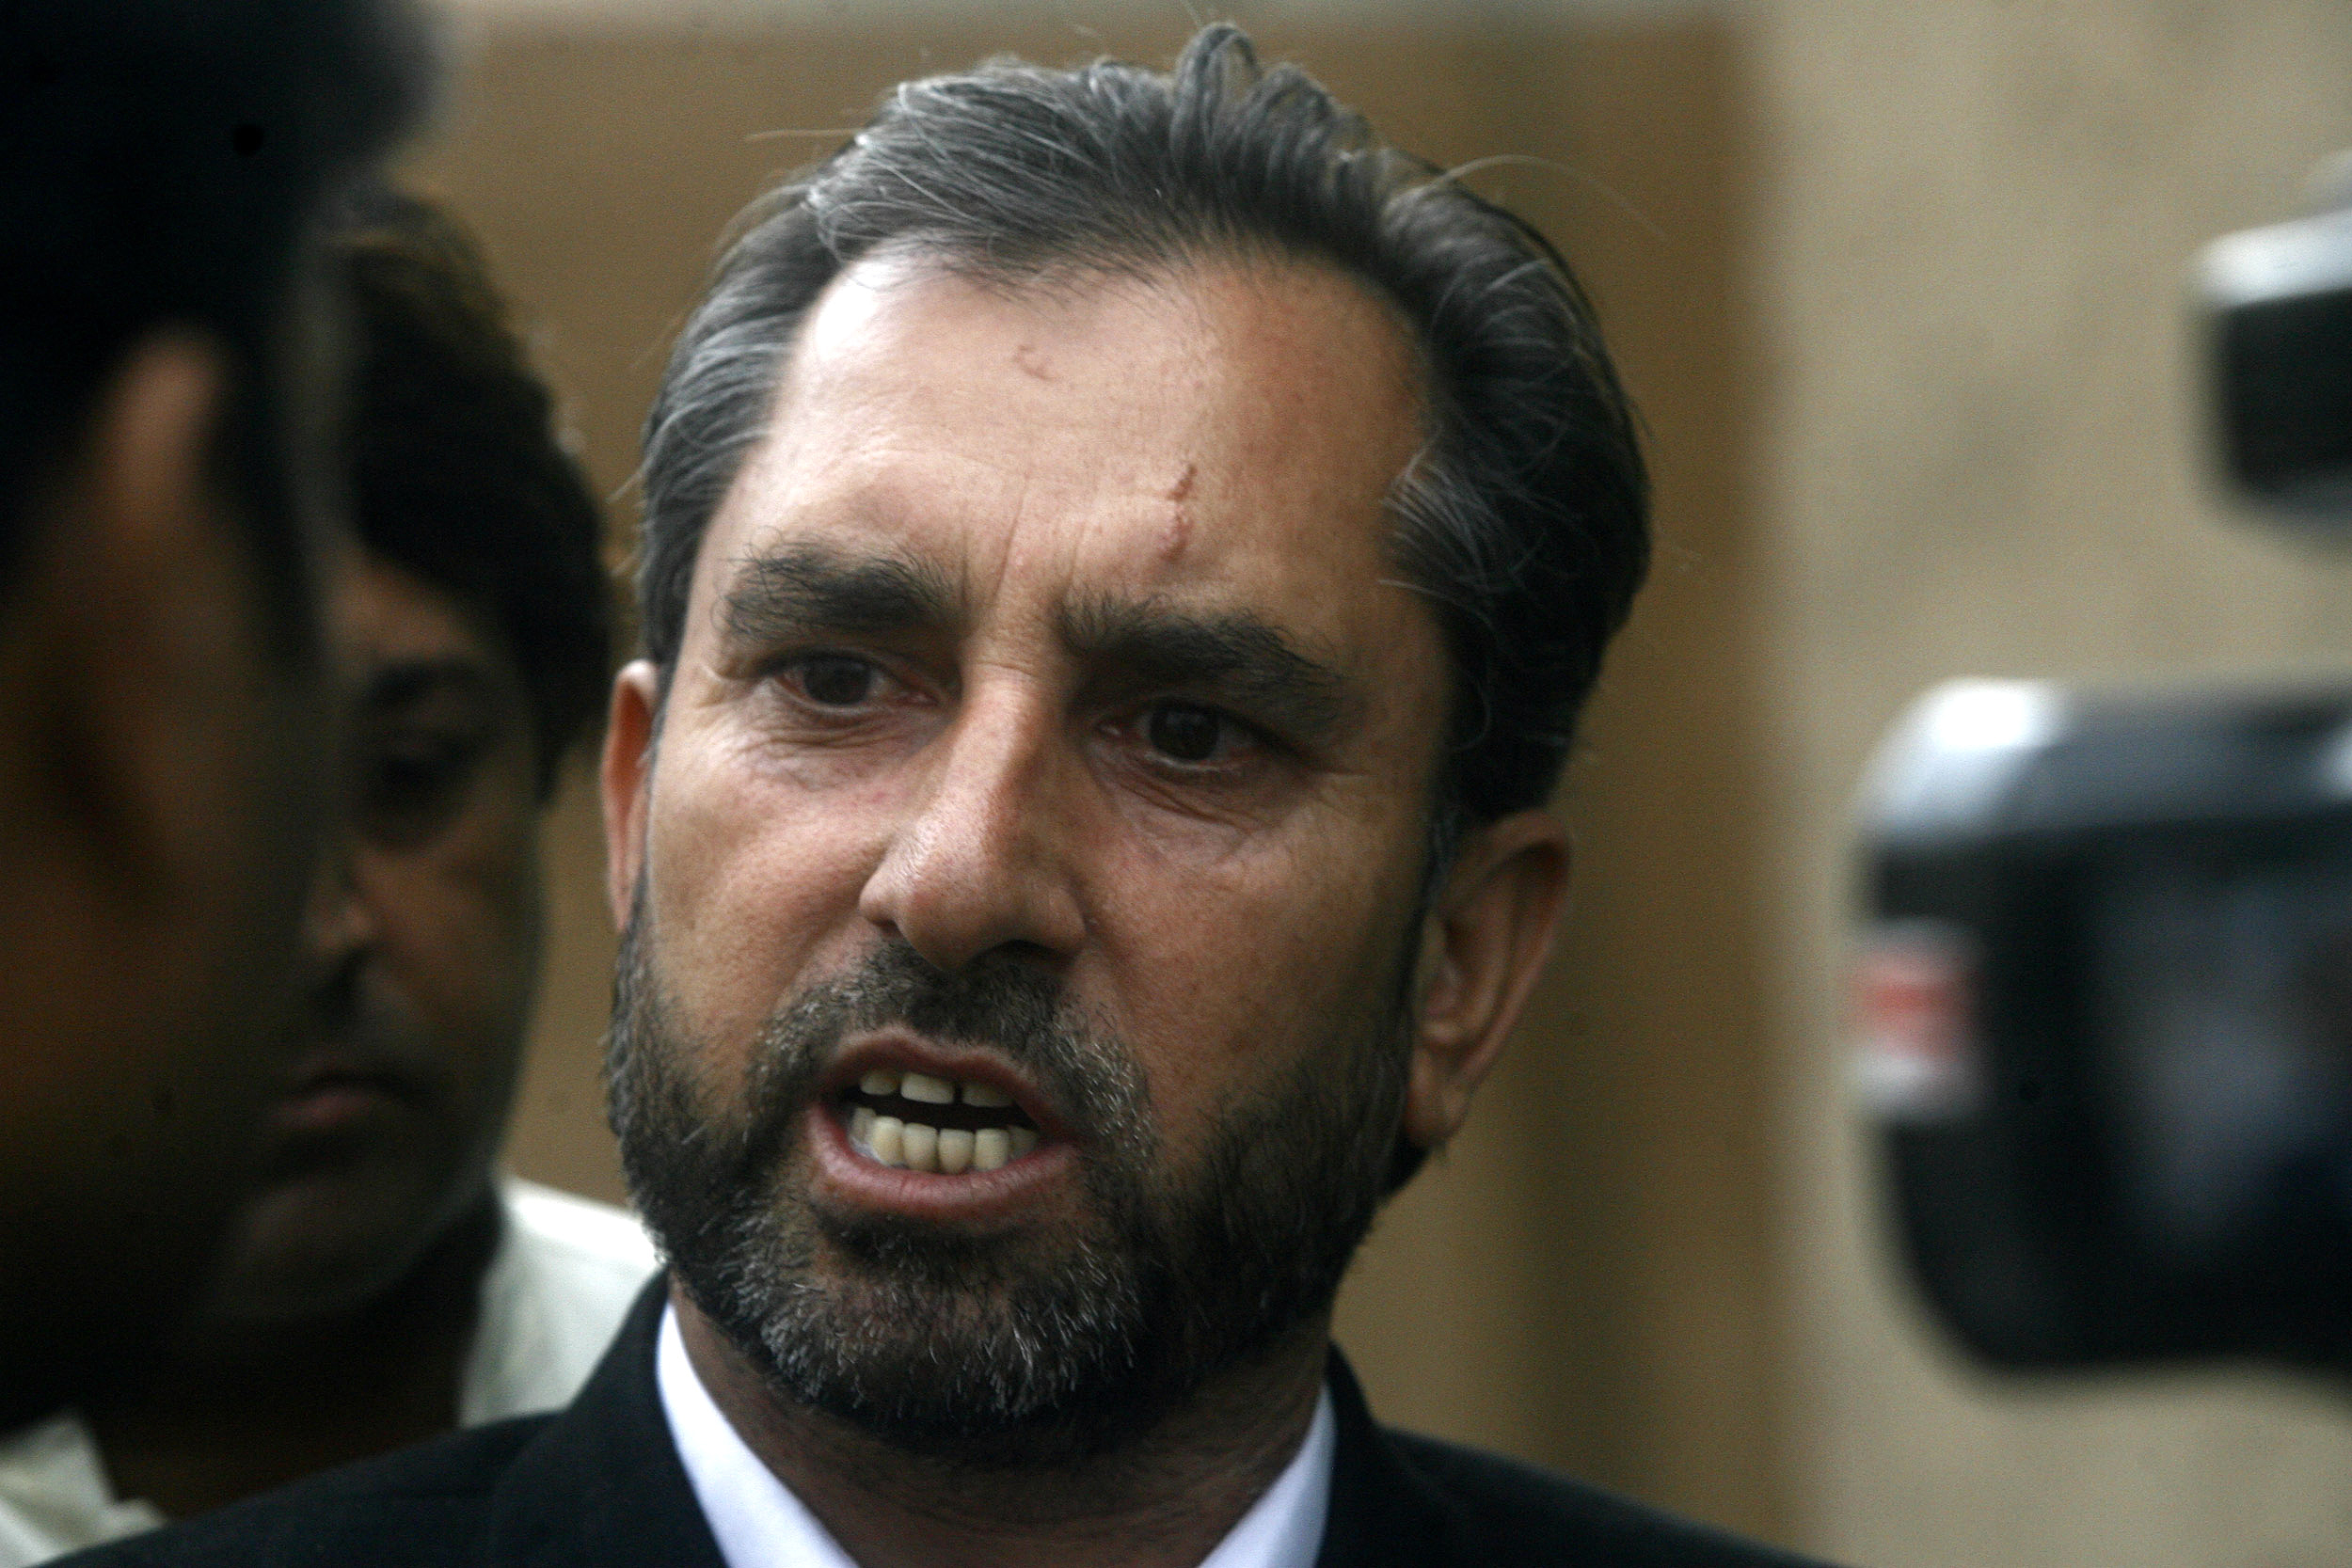 Afridi, lawyer for a Pakistani doctor who helped U.S. officials find al-Qaeda chief Osama bin laden, speaks to the media in Peshawar